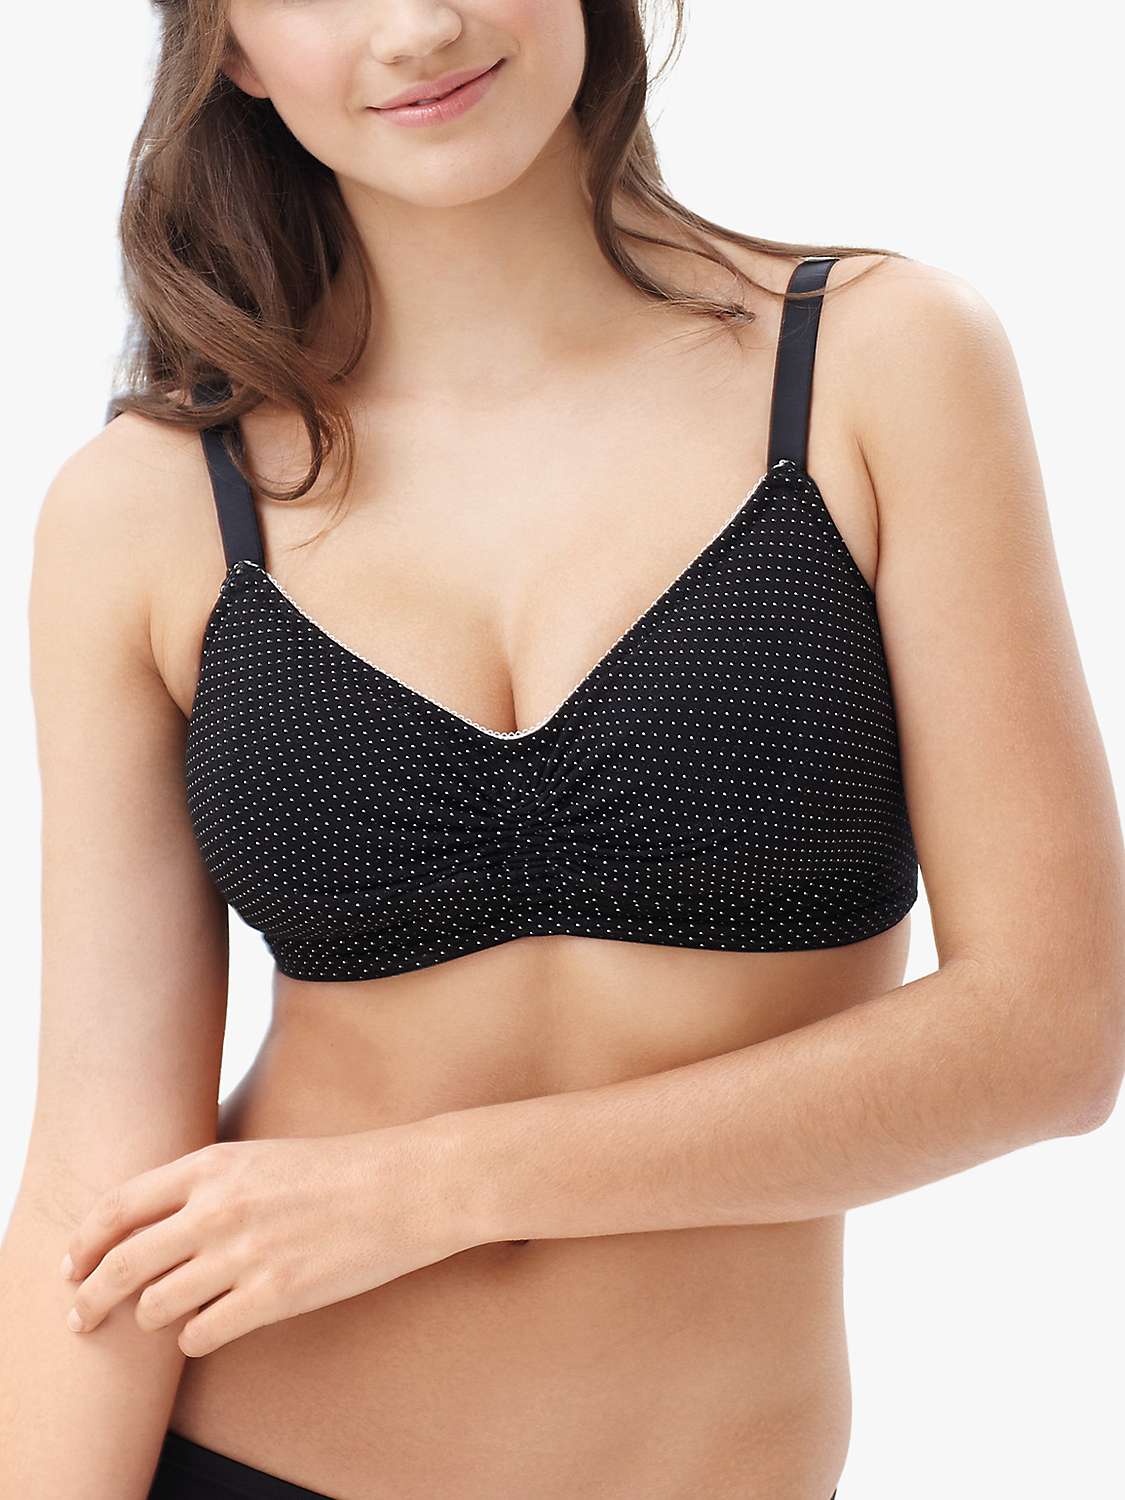 Buy Royce Blossom Non Wired Bra, Black Online at johnlewis.com